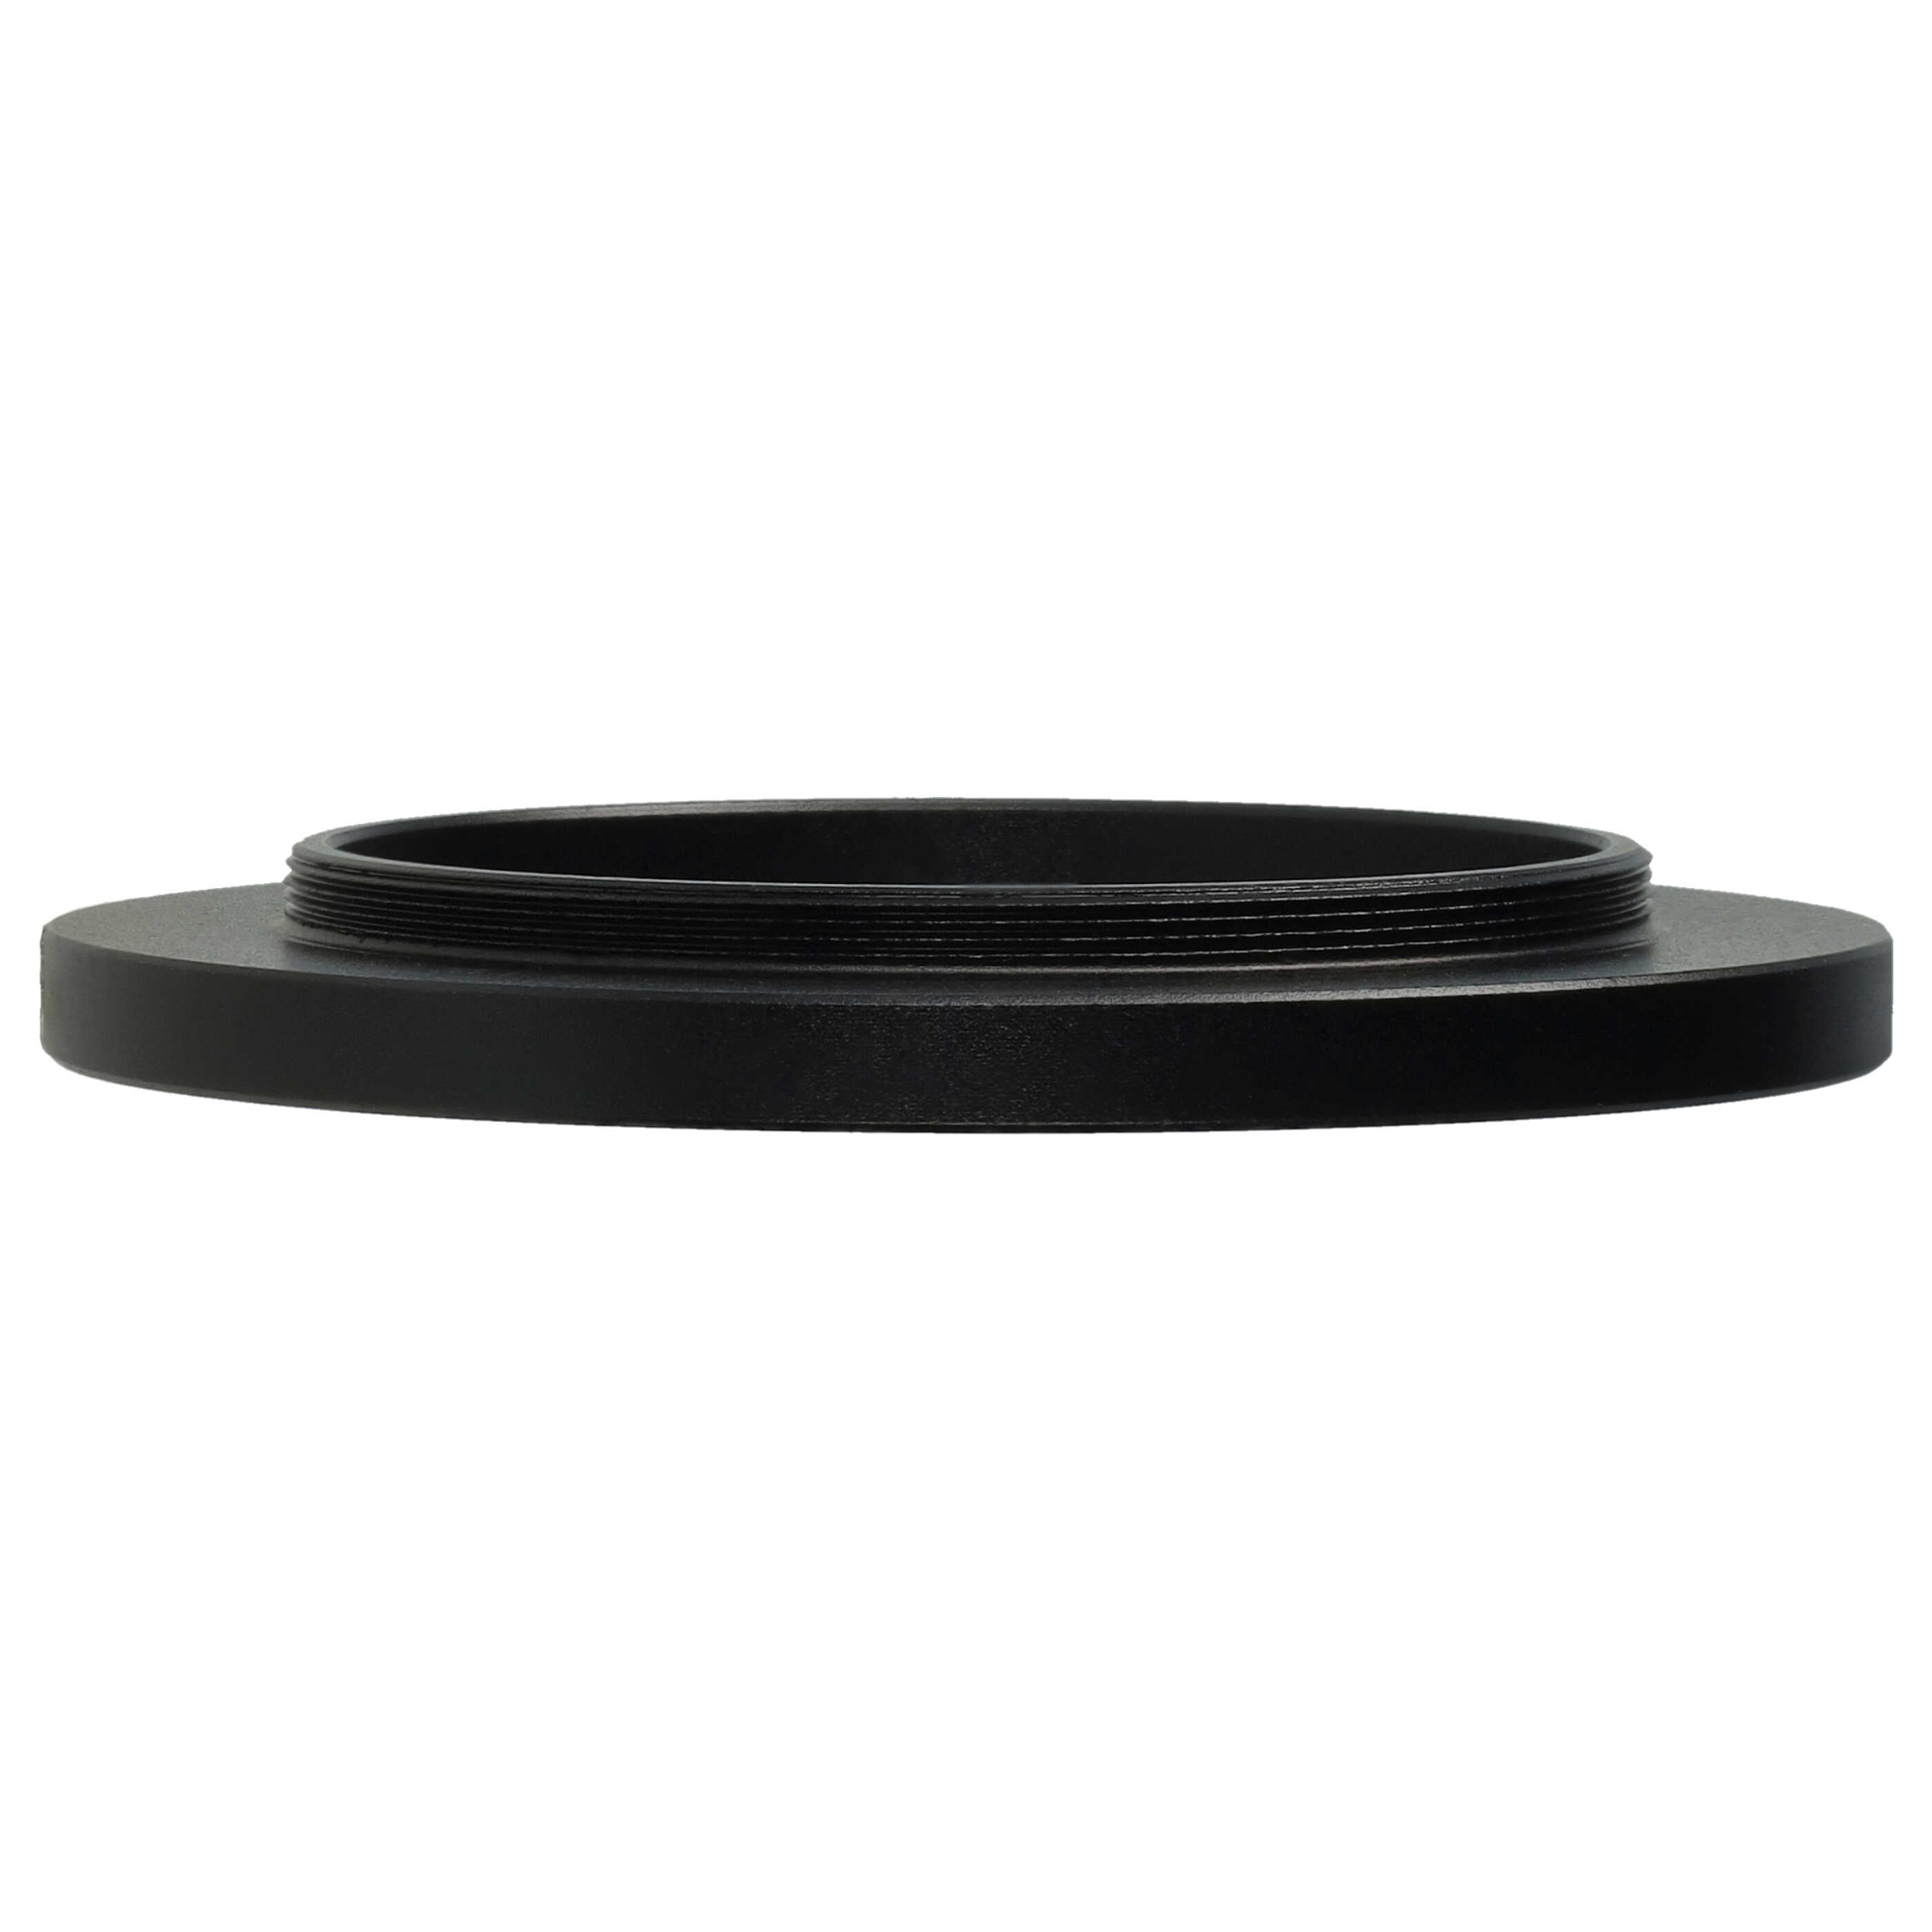 Step-Up Ring Adapter of 40.5 mm to 52 mmfor various Camera Lens - Filter Adapter